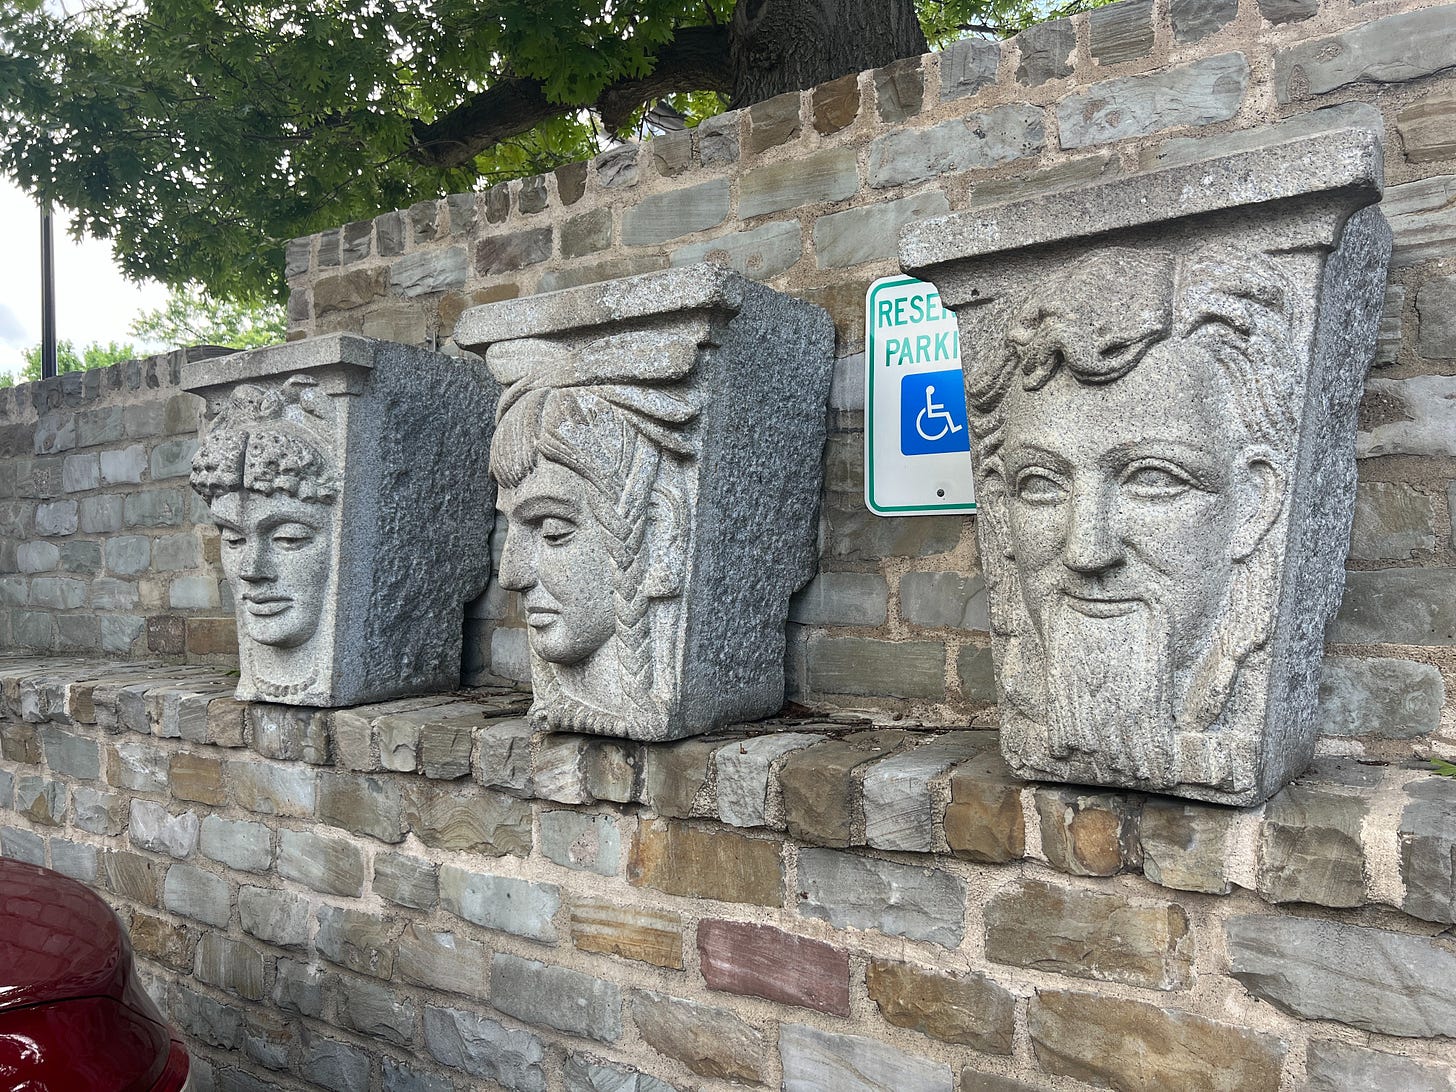 Three stone keystones with faces carved into them, resting on a brick shelf along an outdoor brick wall